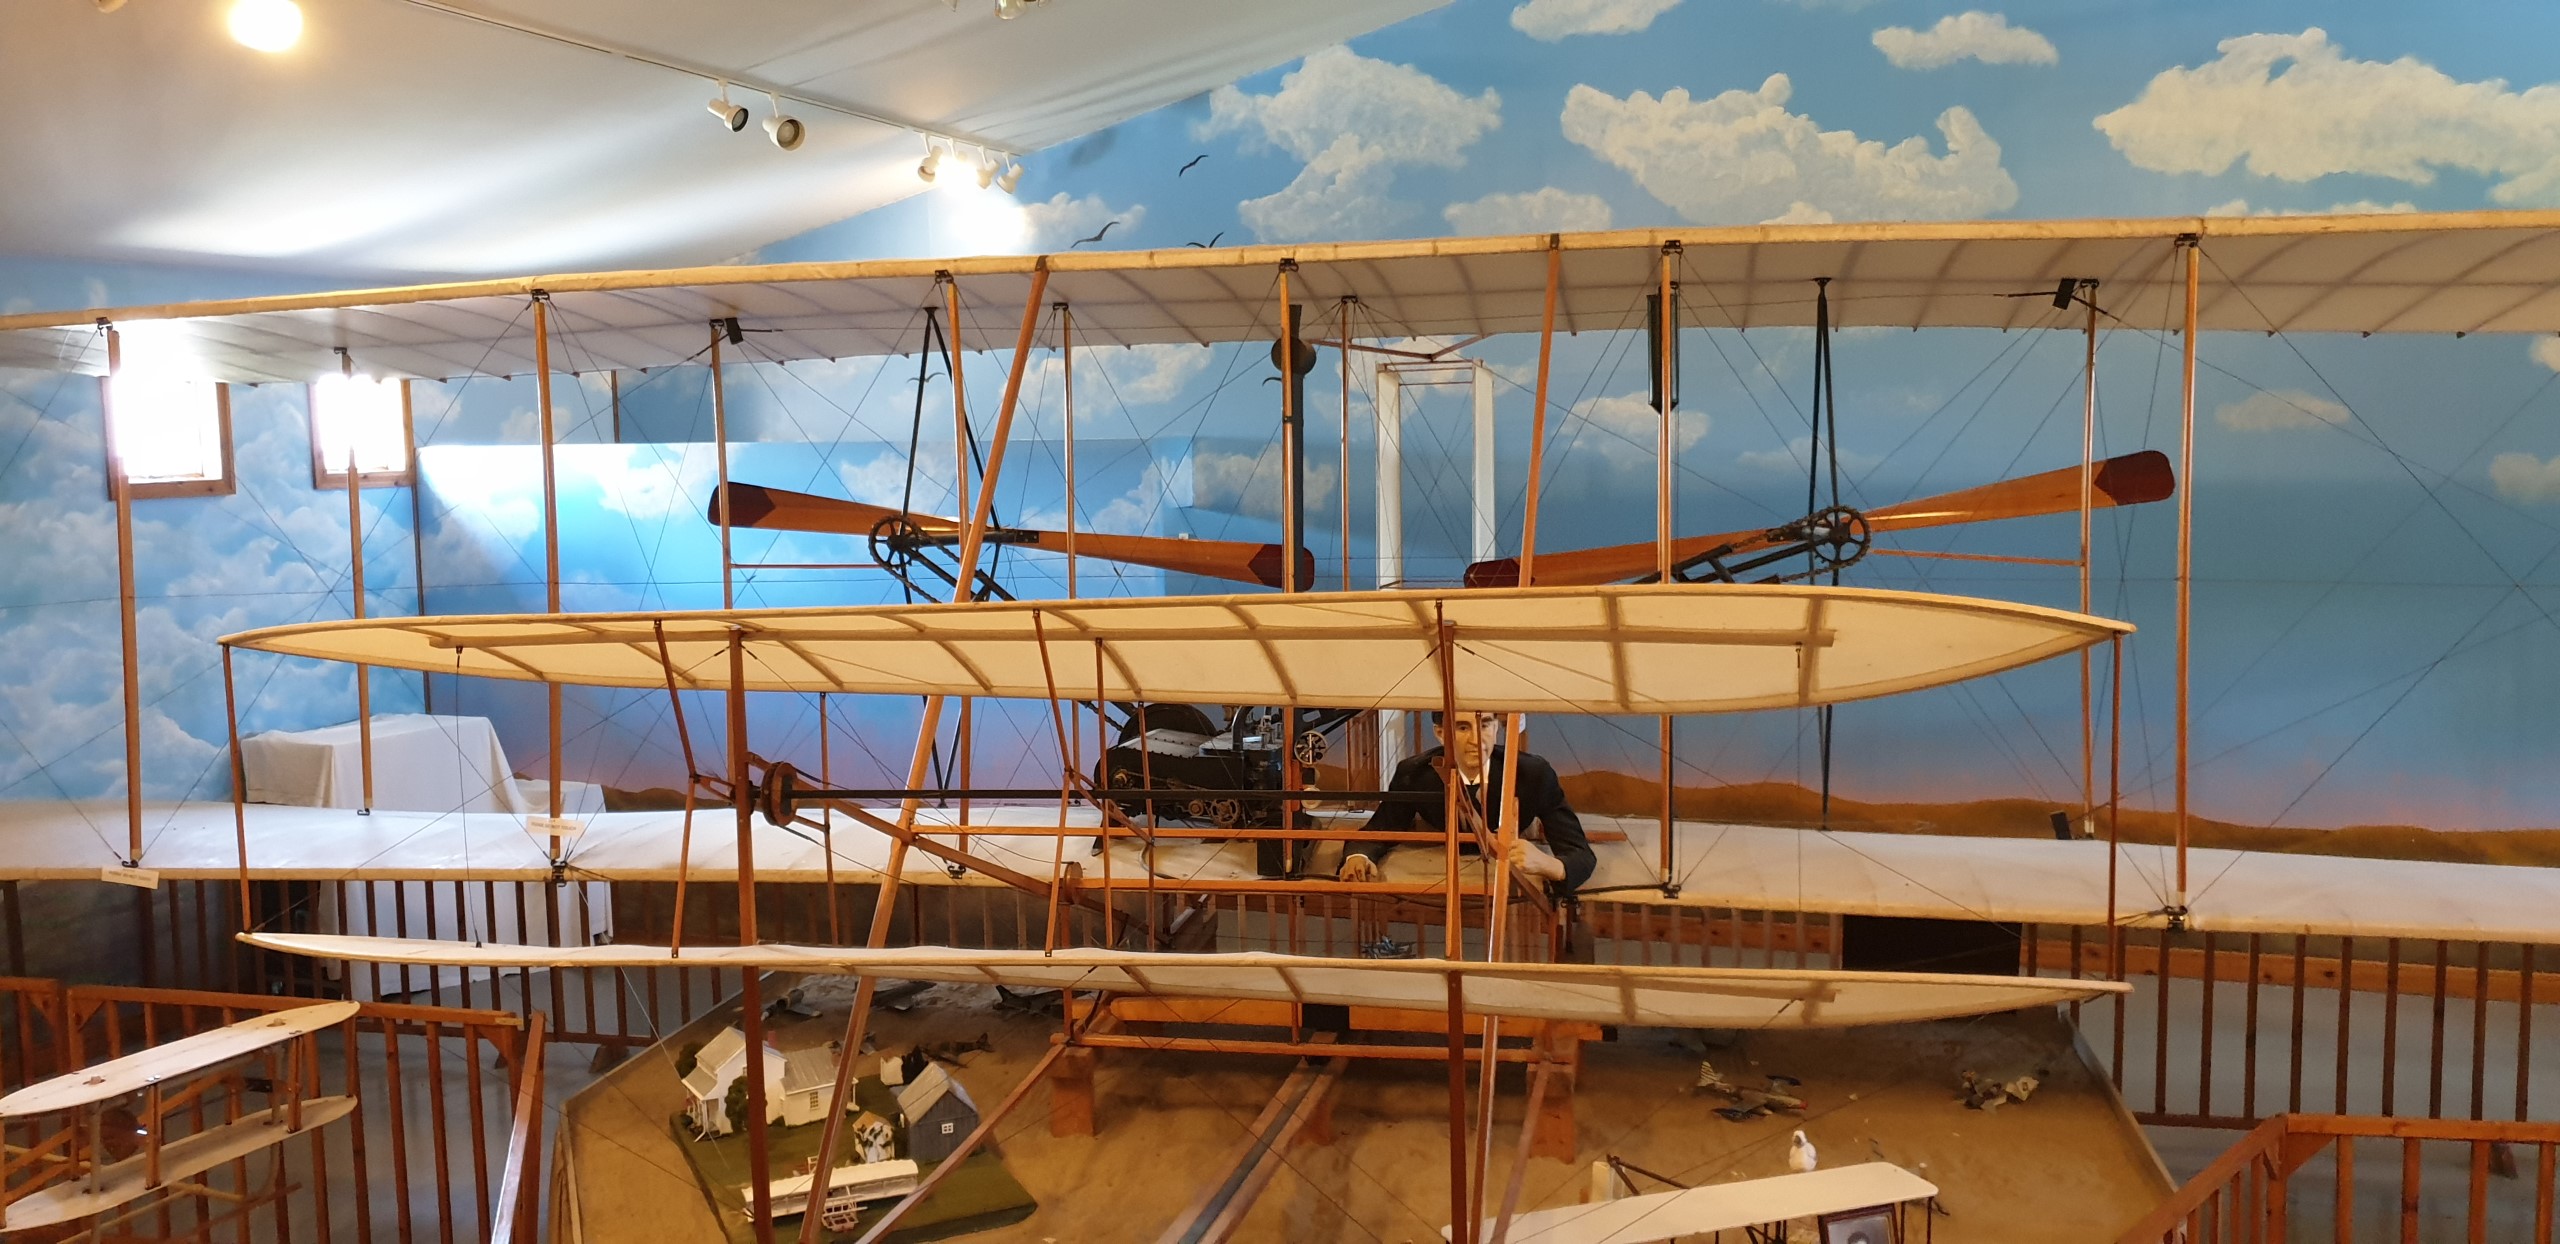 image from Wilbur Wright Birthplace Museum